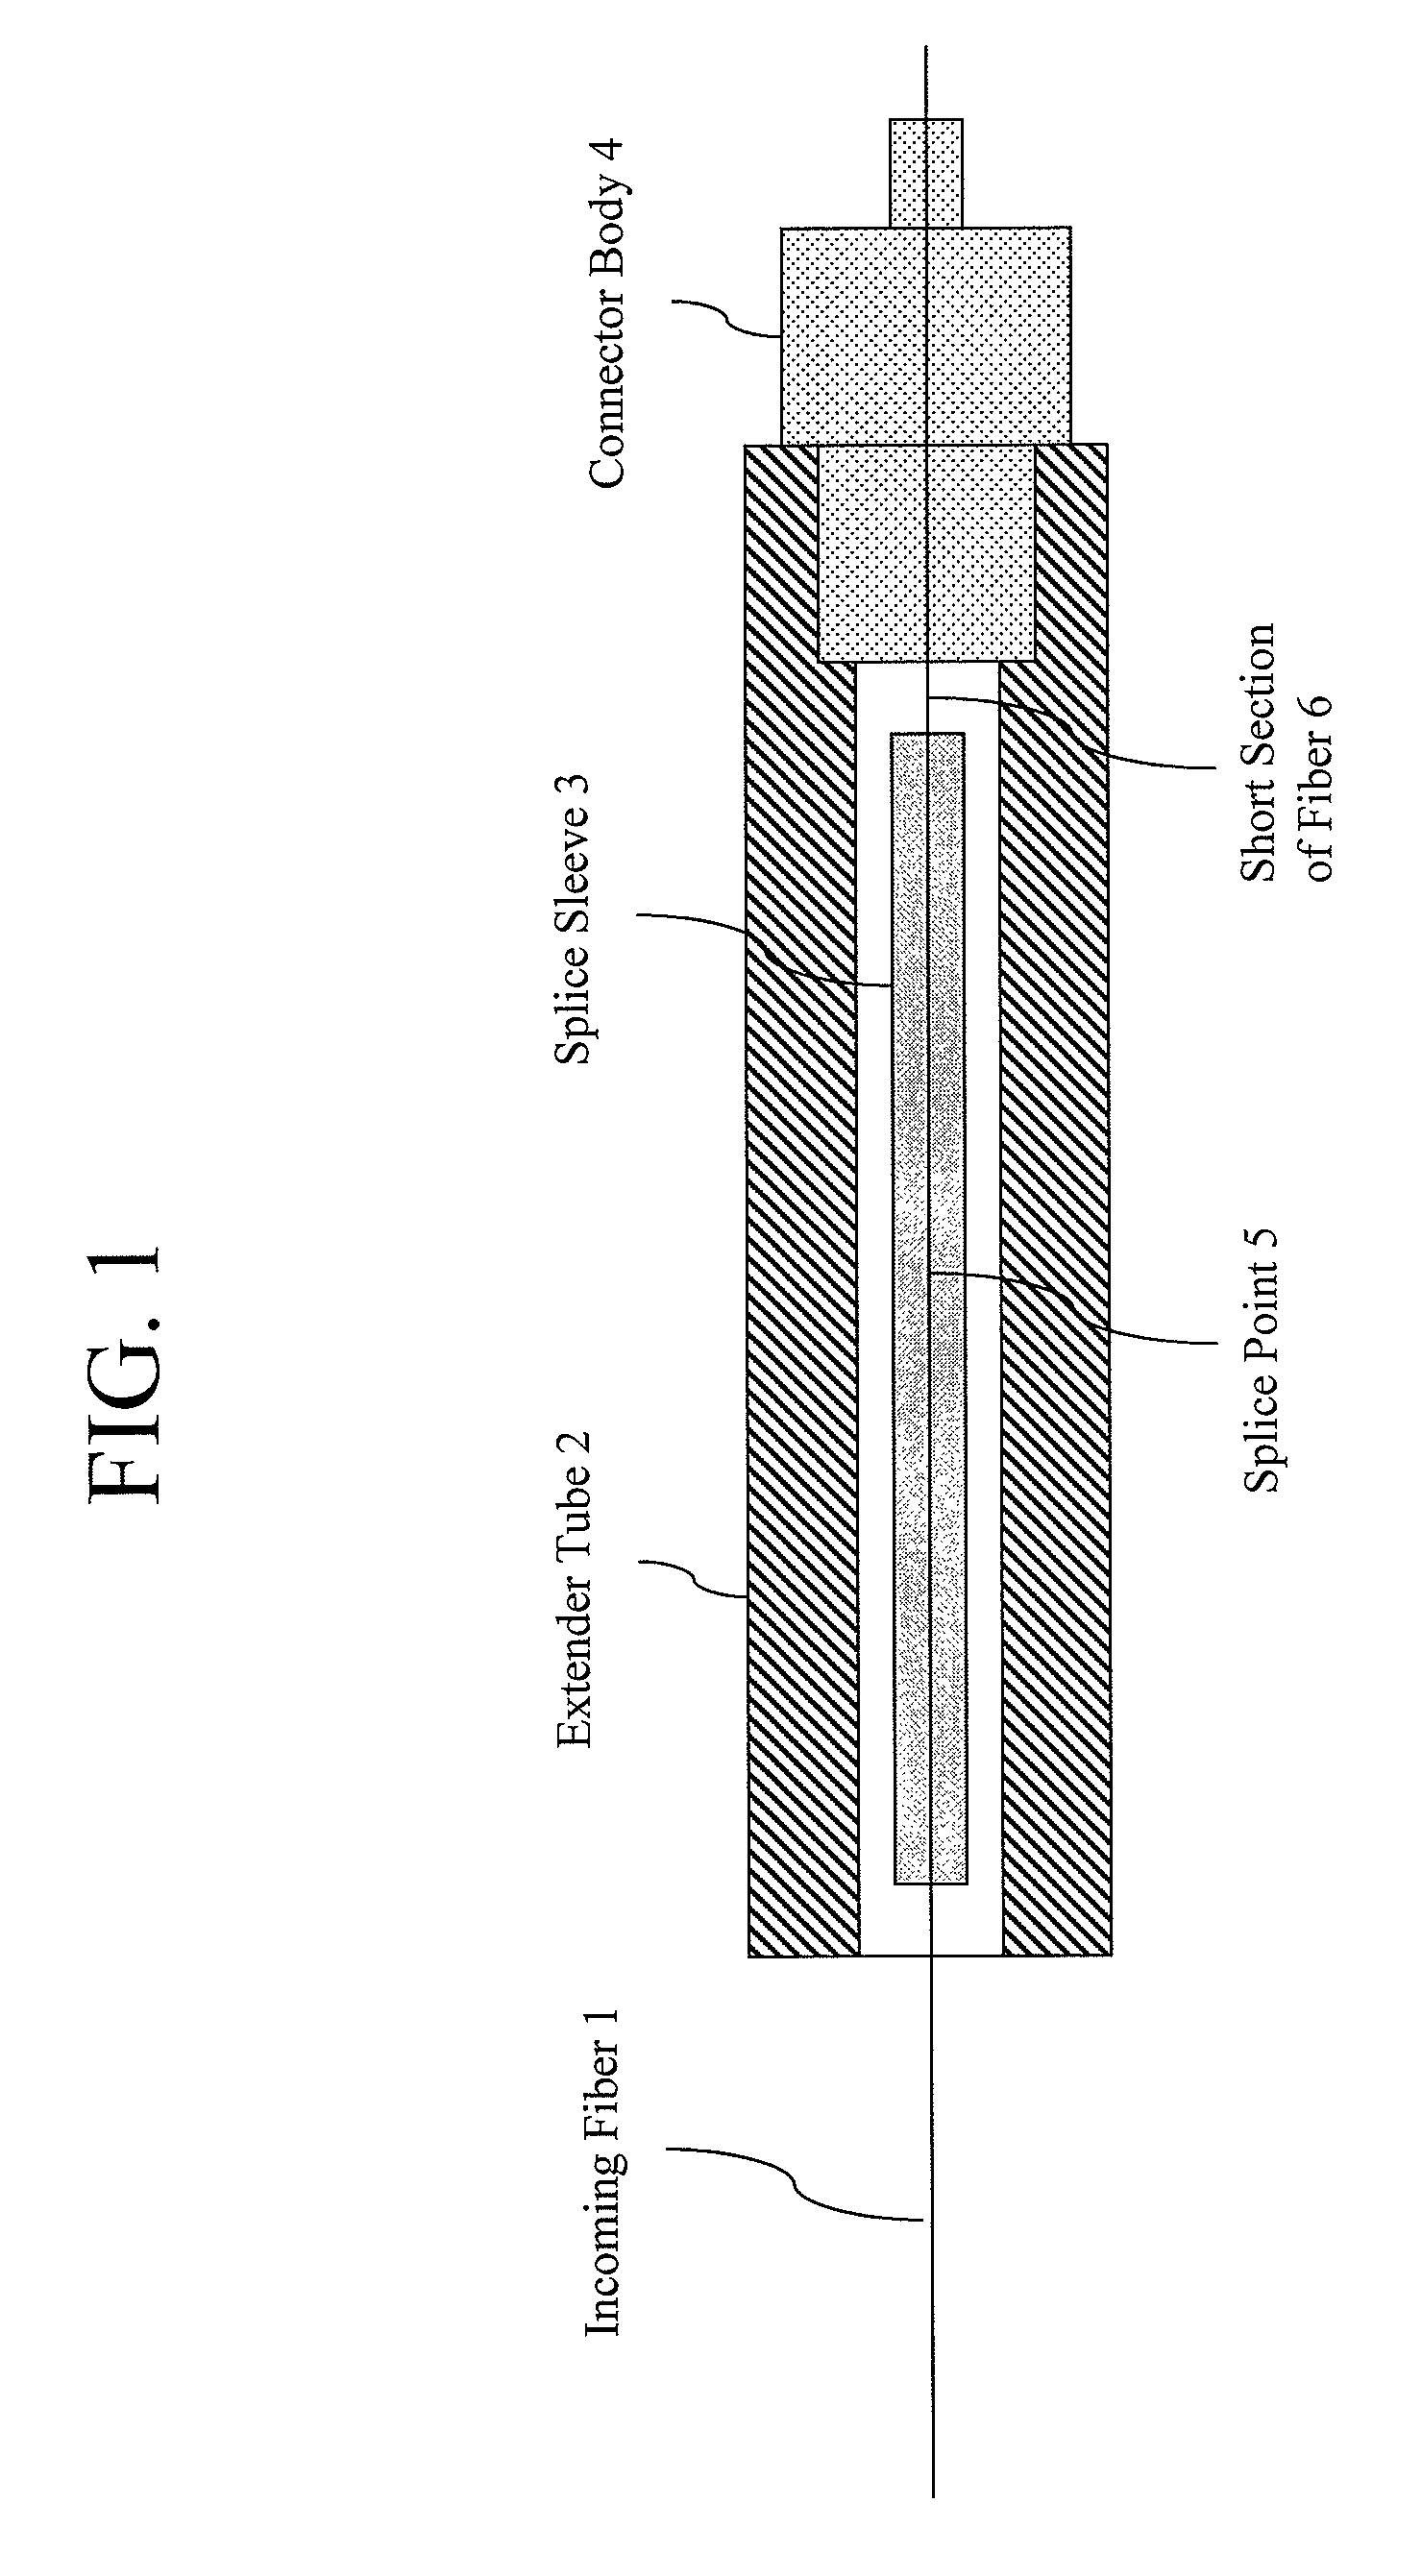 Spliced-on connector system and method, splicer, and connector holder for producing the same